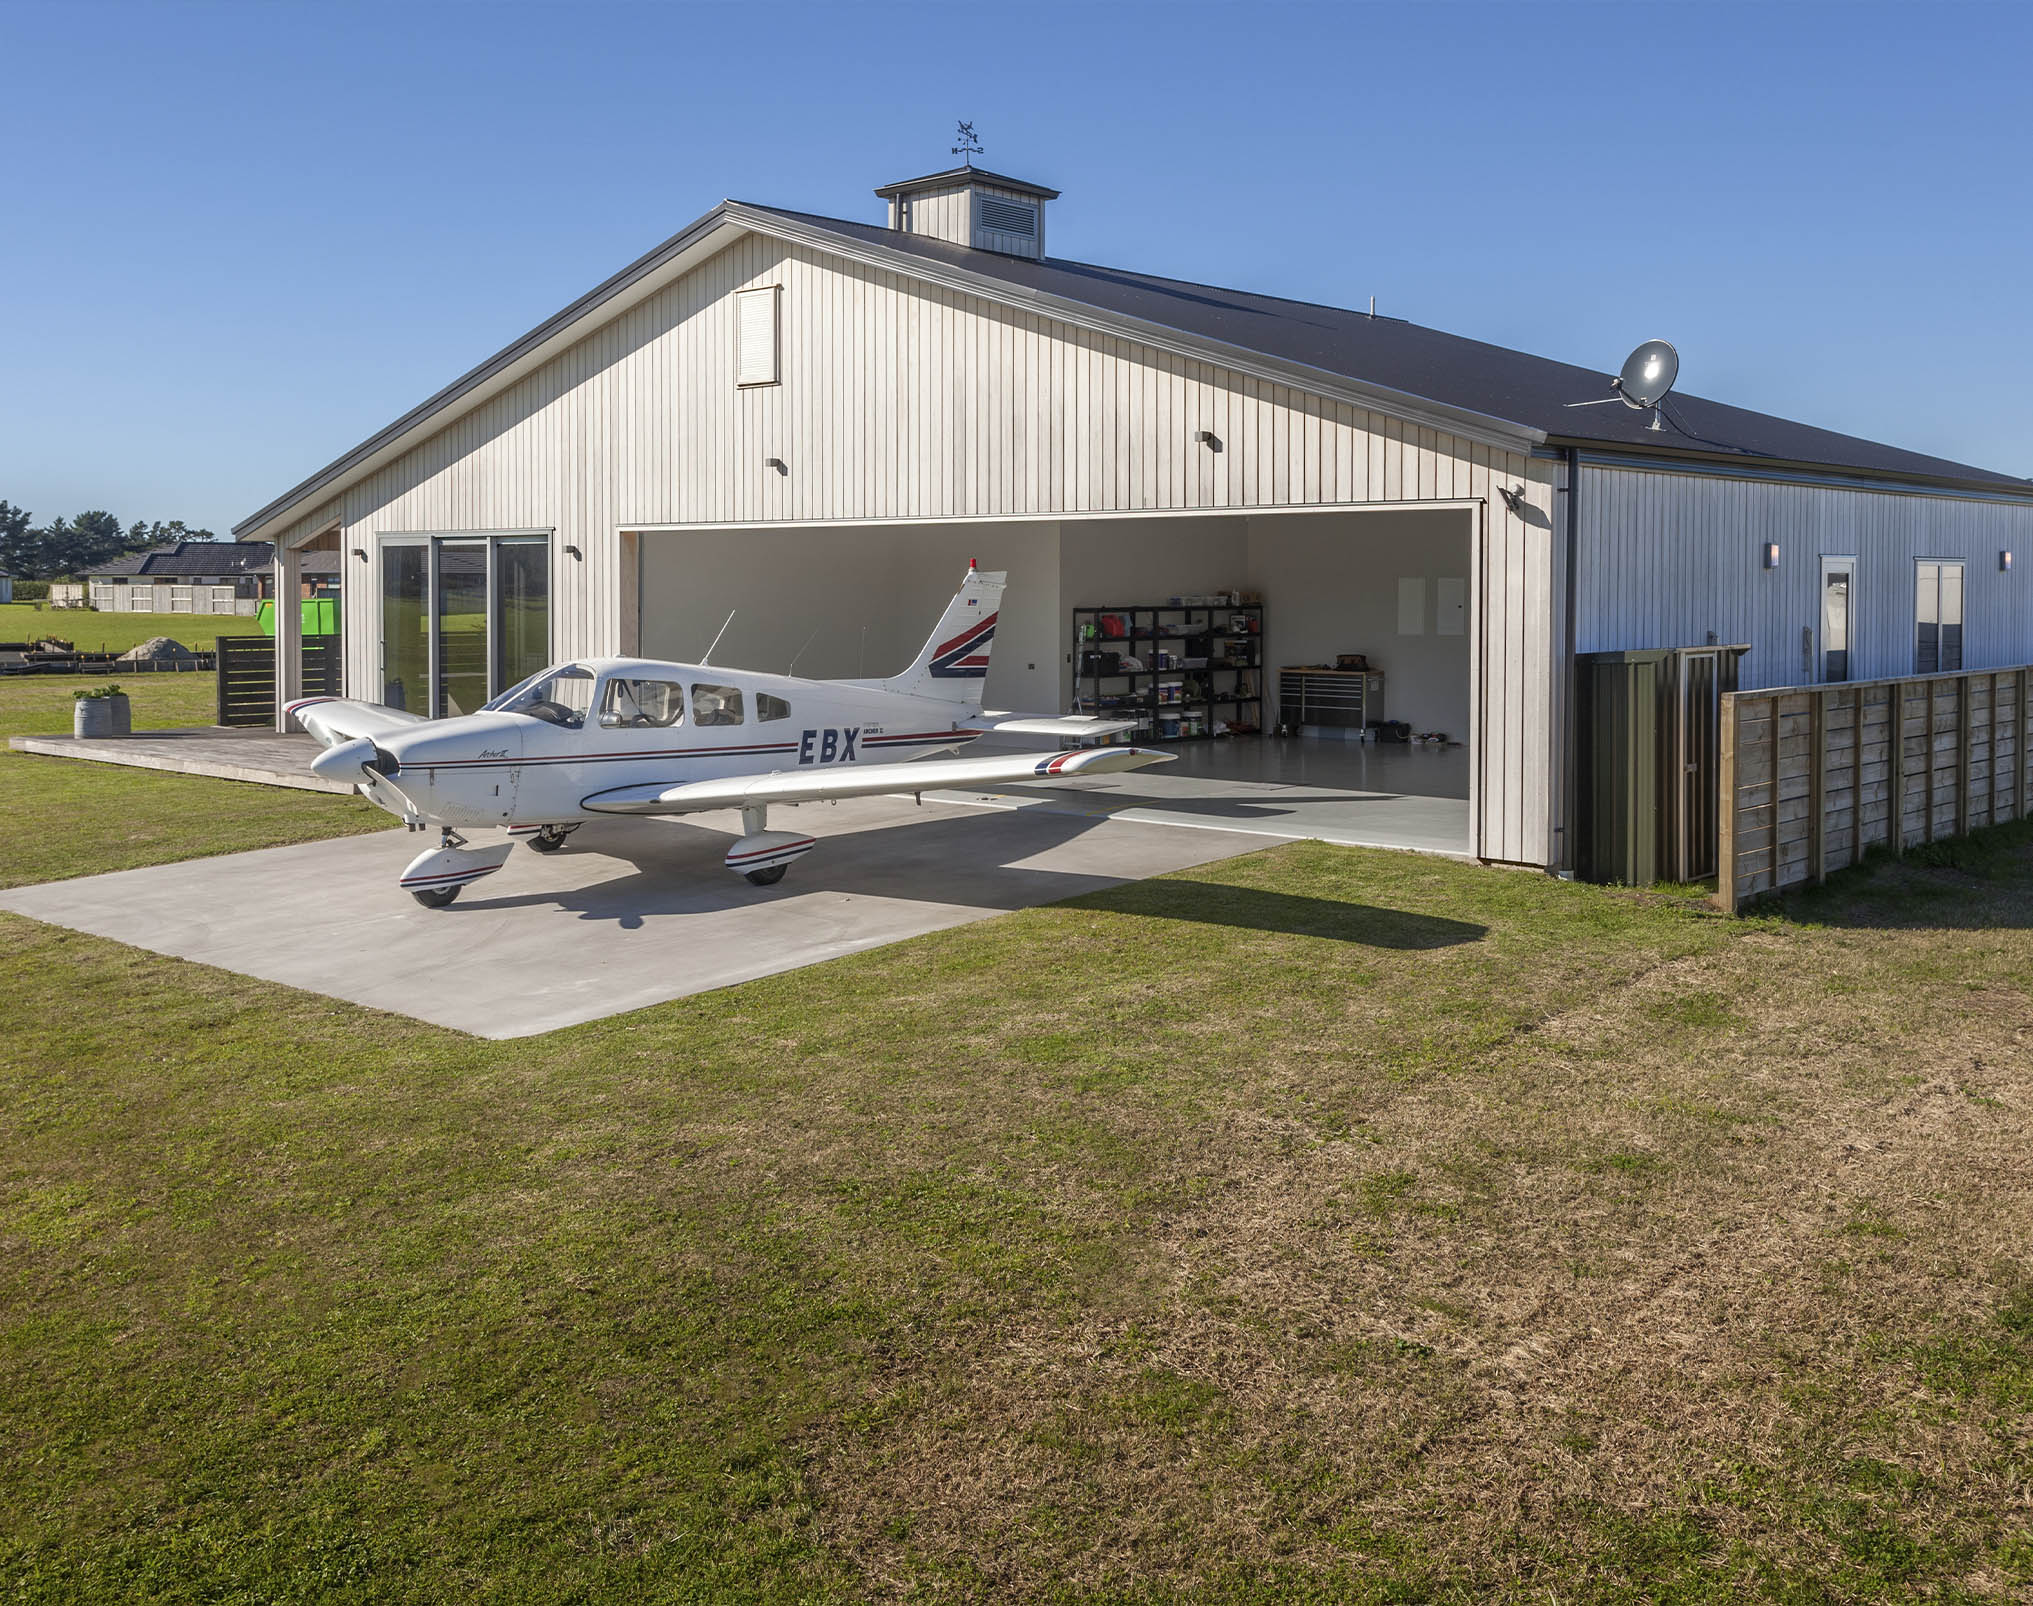 Flying into Whitianga - Vulcan Cladding in Sioo_x Finish - featured image